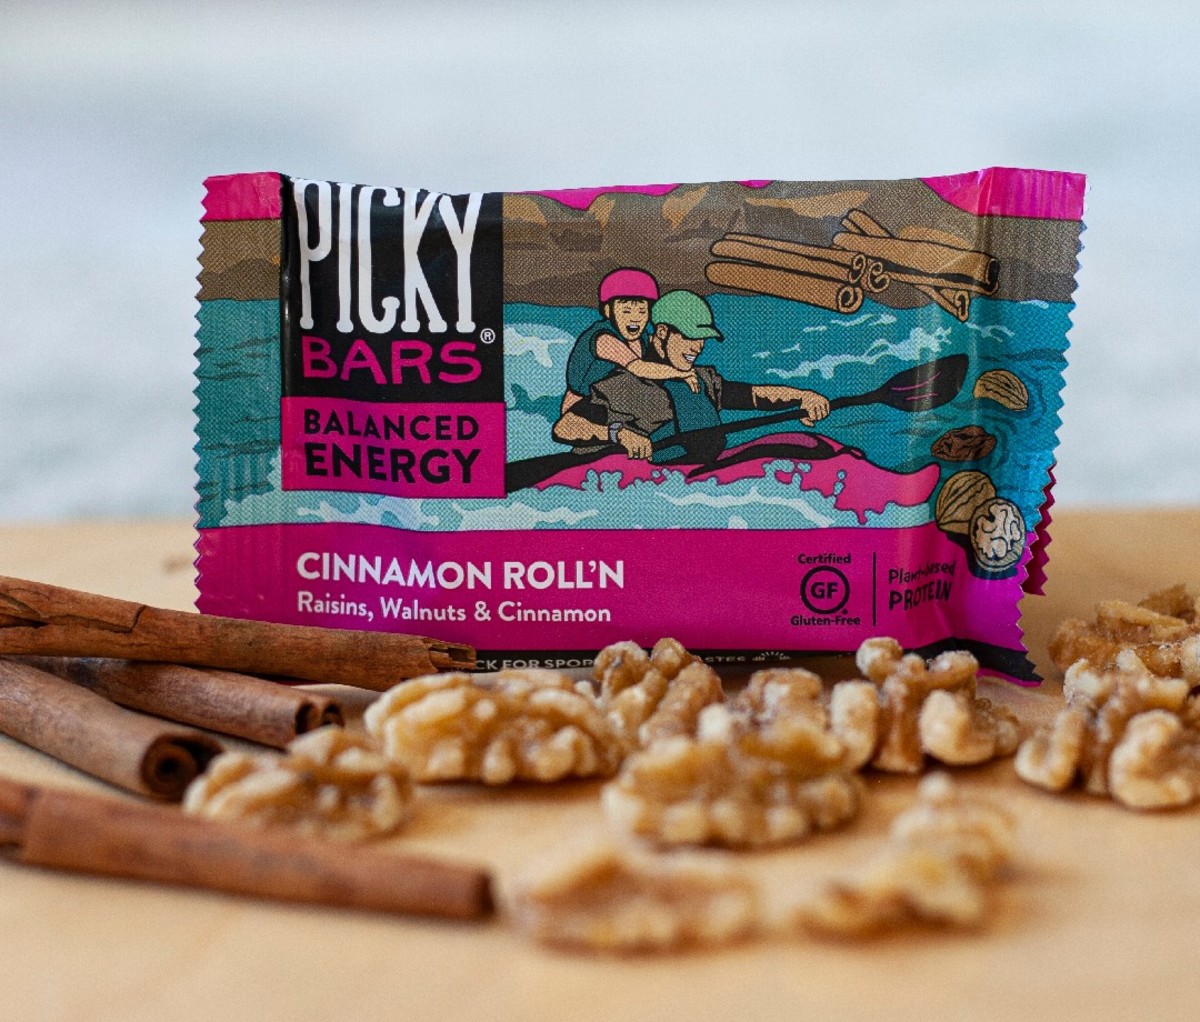 Laird Picky Bar in a package on counter behind cinnamon sticks and walnuts